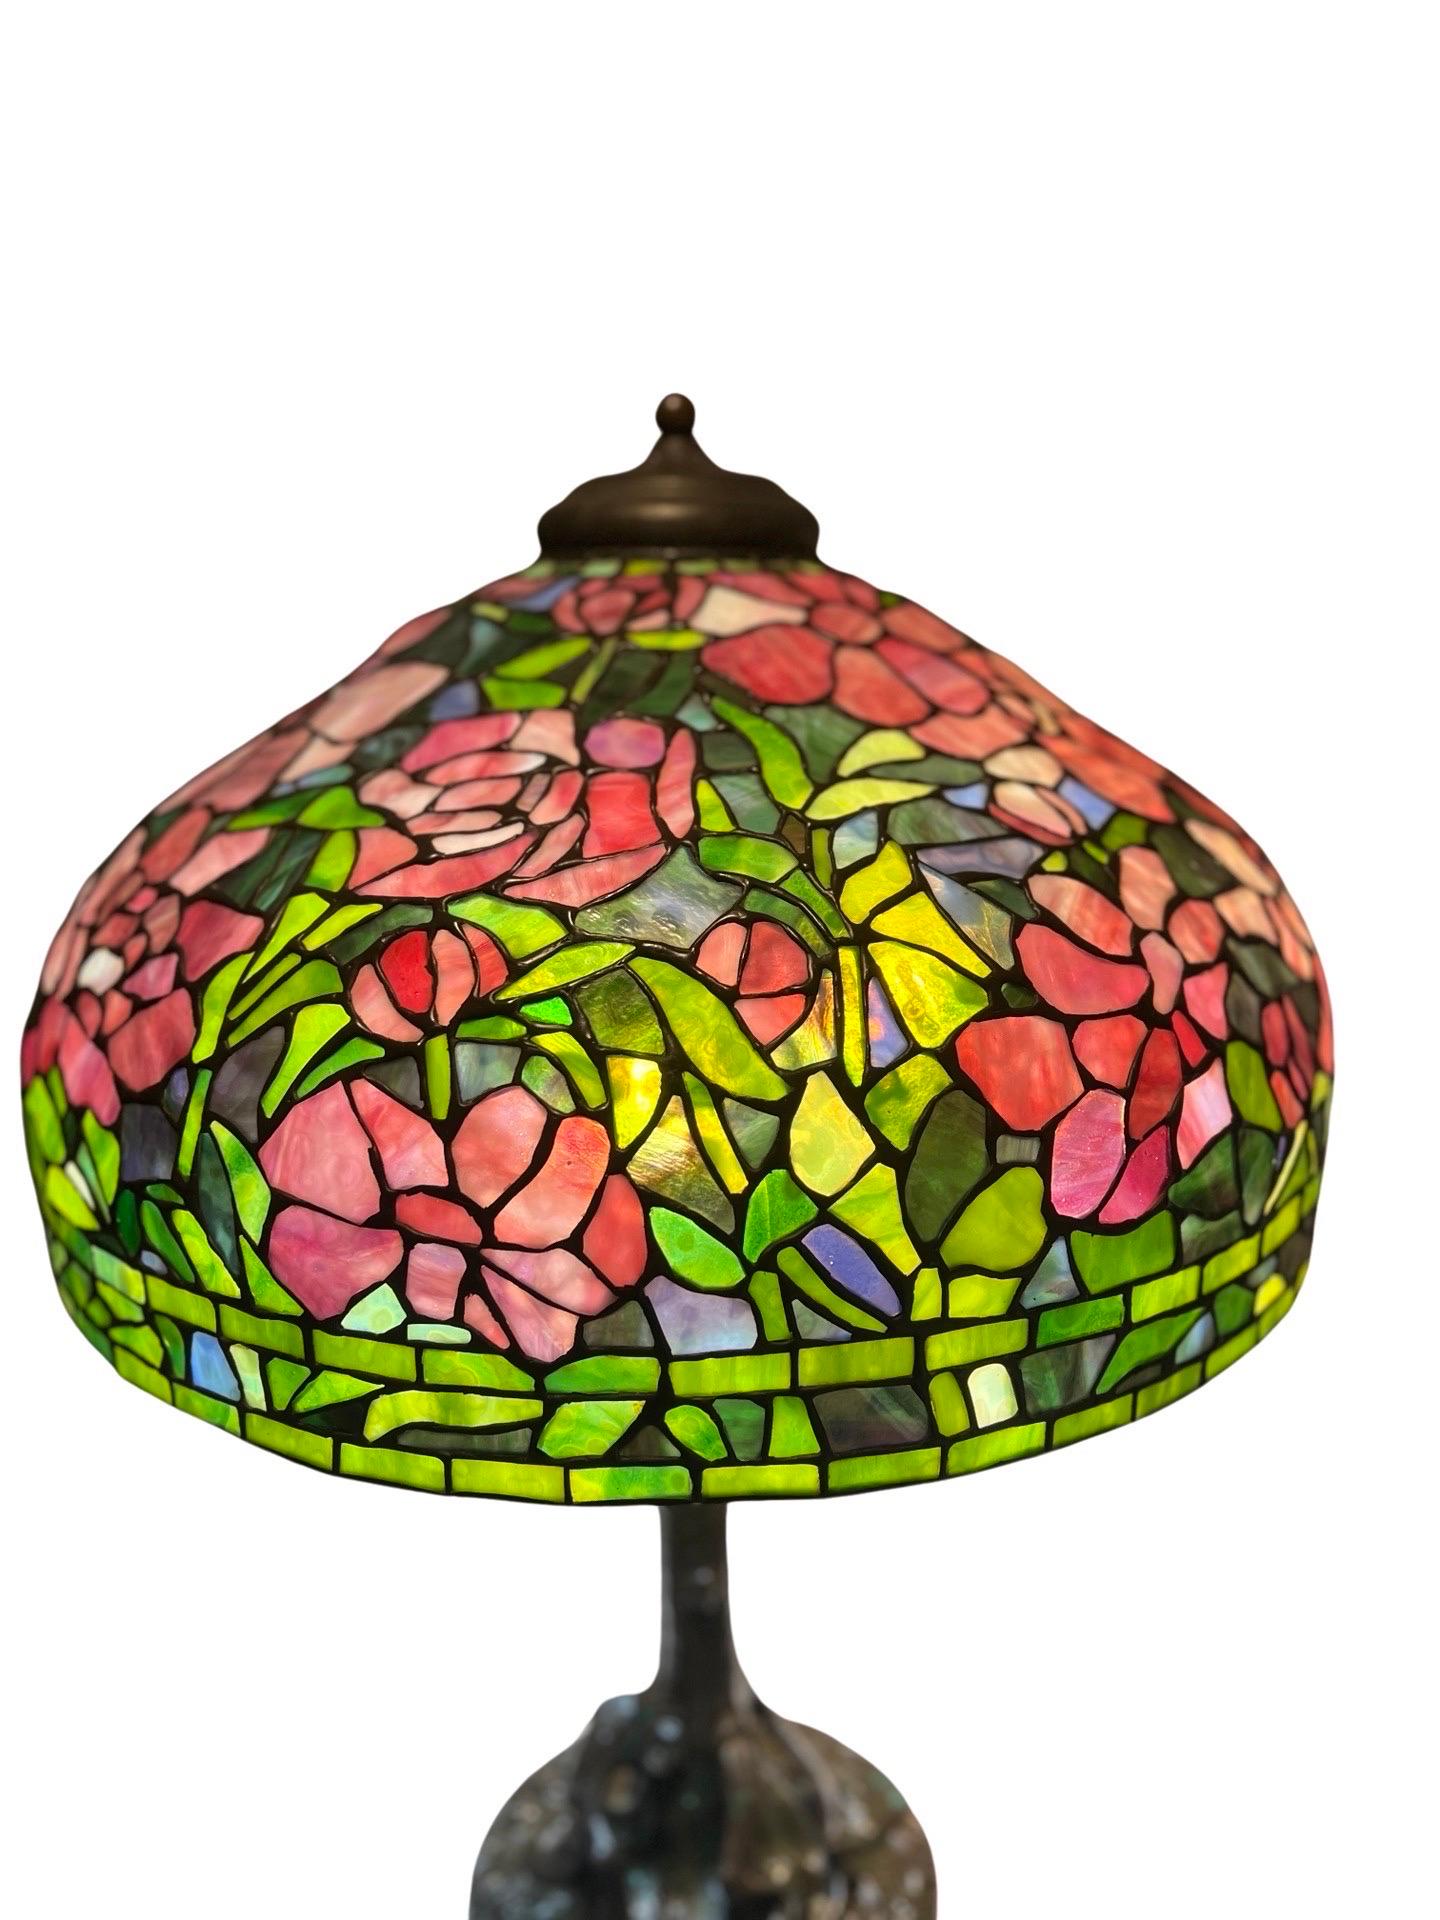 Unique Art Glass & Metal Company Leaded Glass Peony Table Lamp C. 1915 In Good Condition For Sale In Atlanta, GA